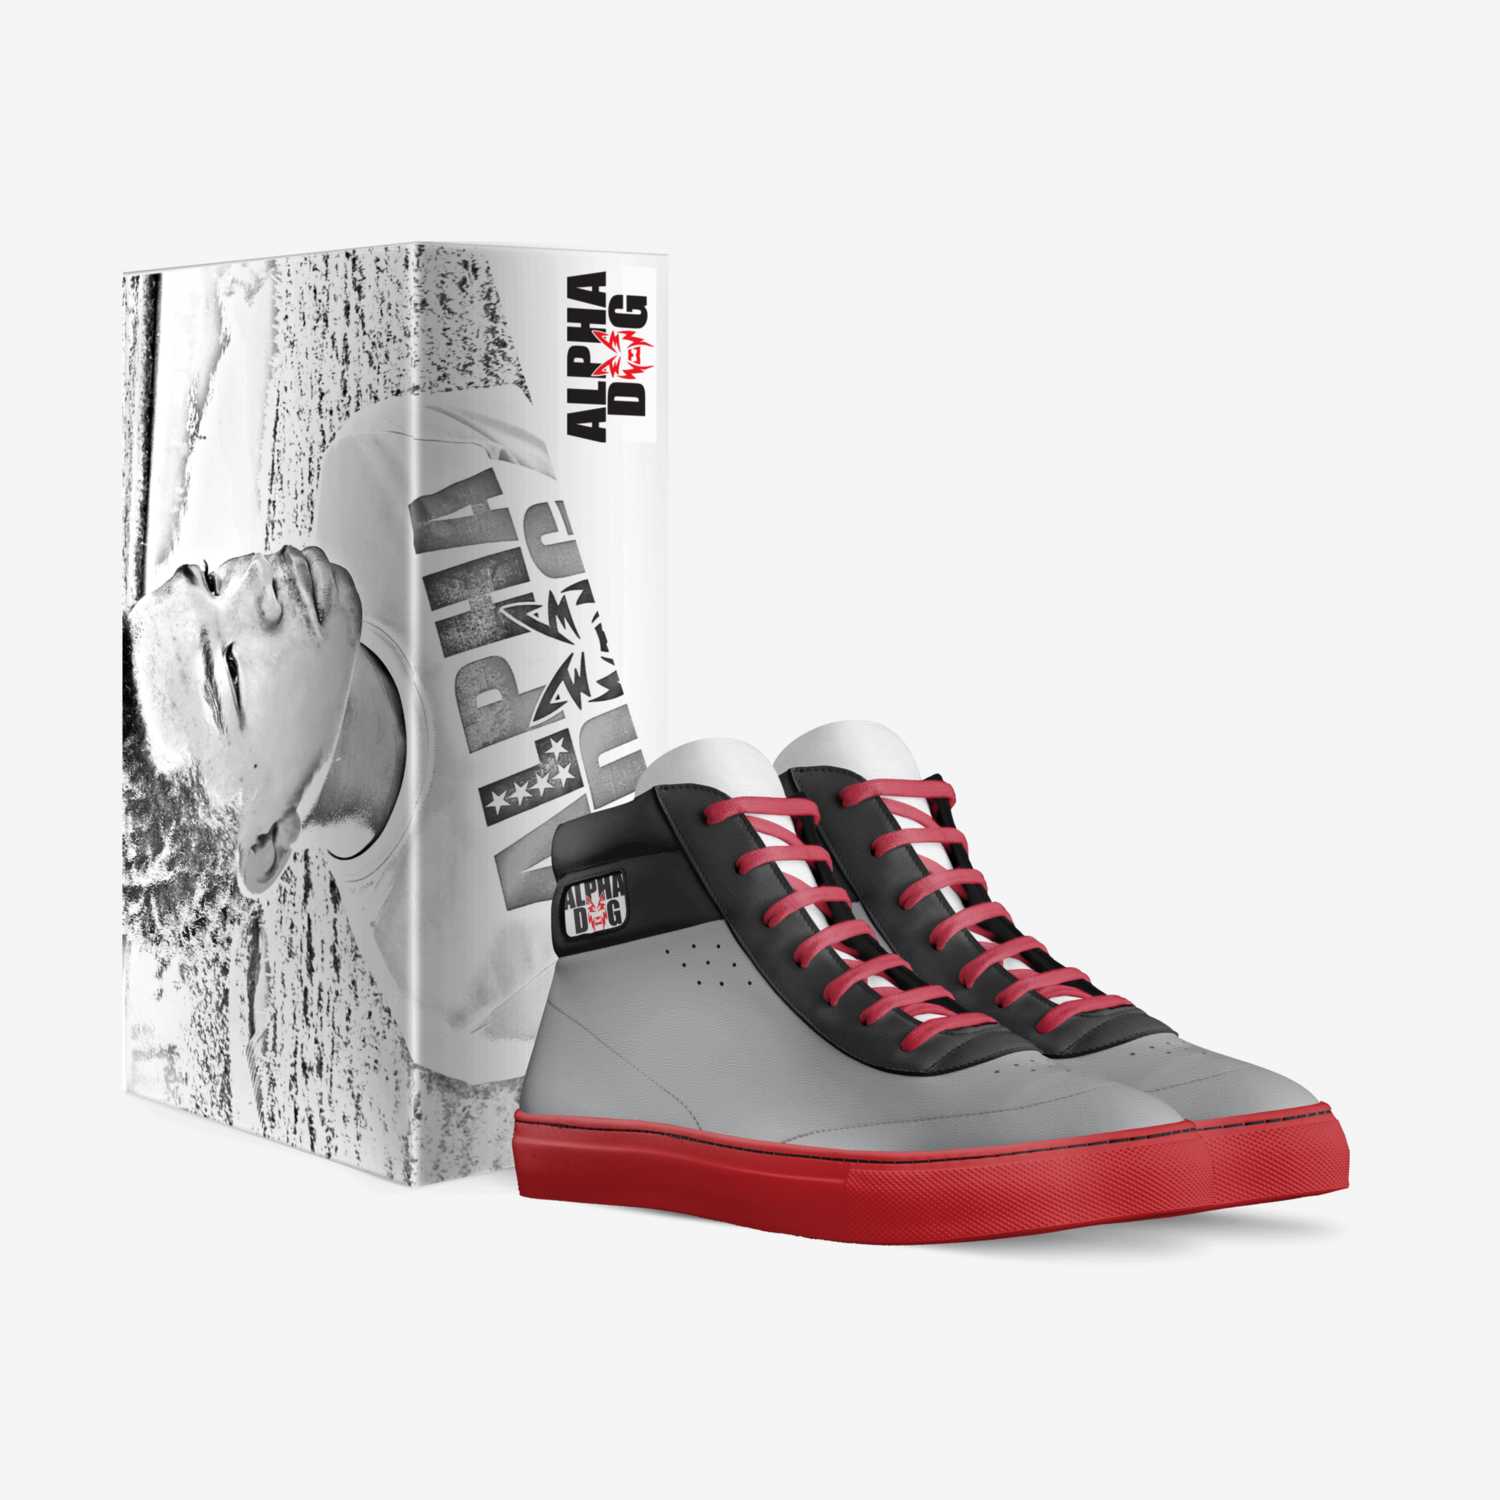 AD Attack 1 custom made in Italy shoes by Marcus Taylor | Box view